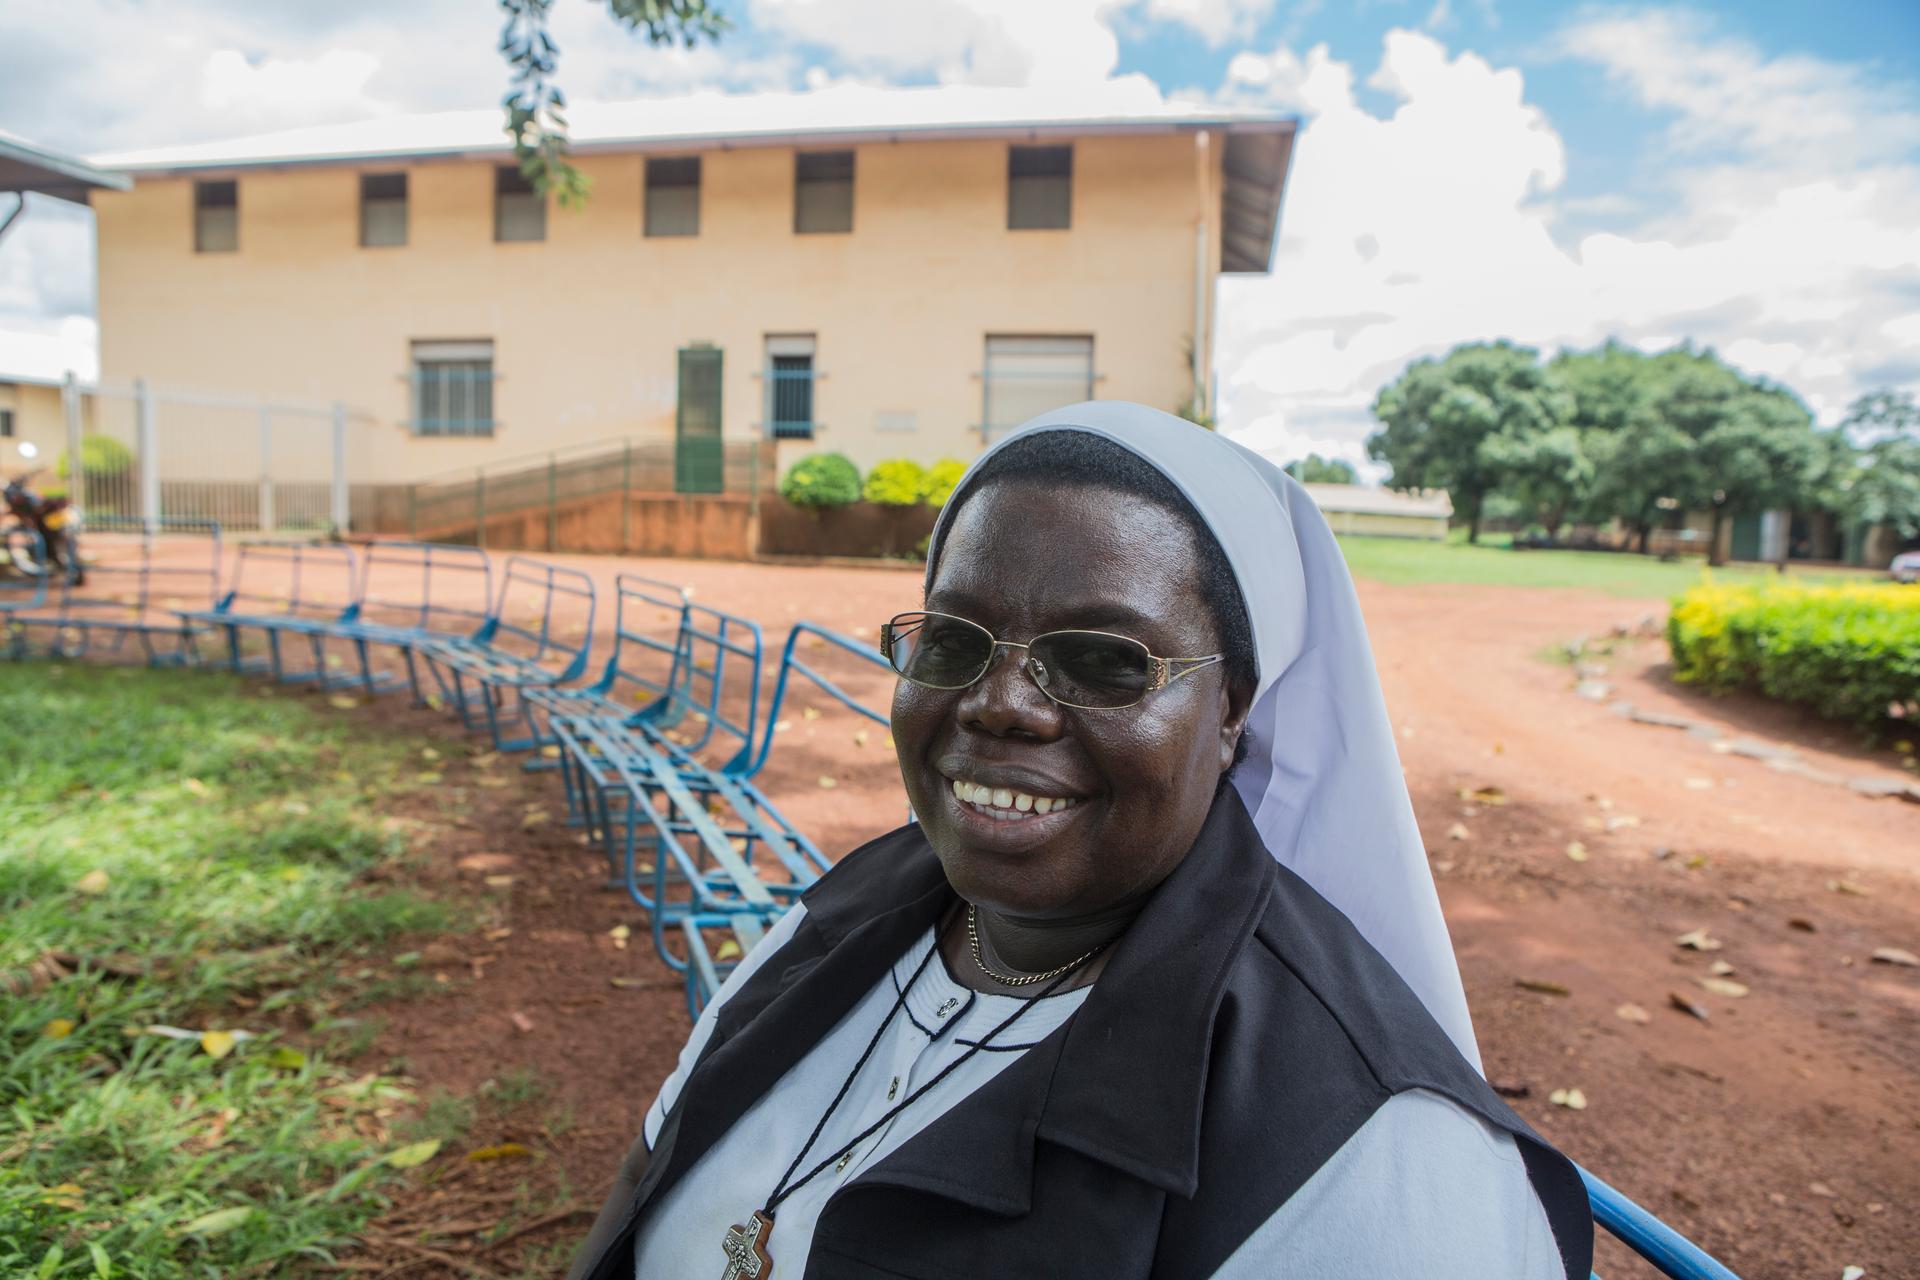 Sister Rosemary Nyirumbe sitting on a bench in front of St. Monica's Vocational School in Gulu, Uganda.